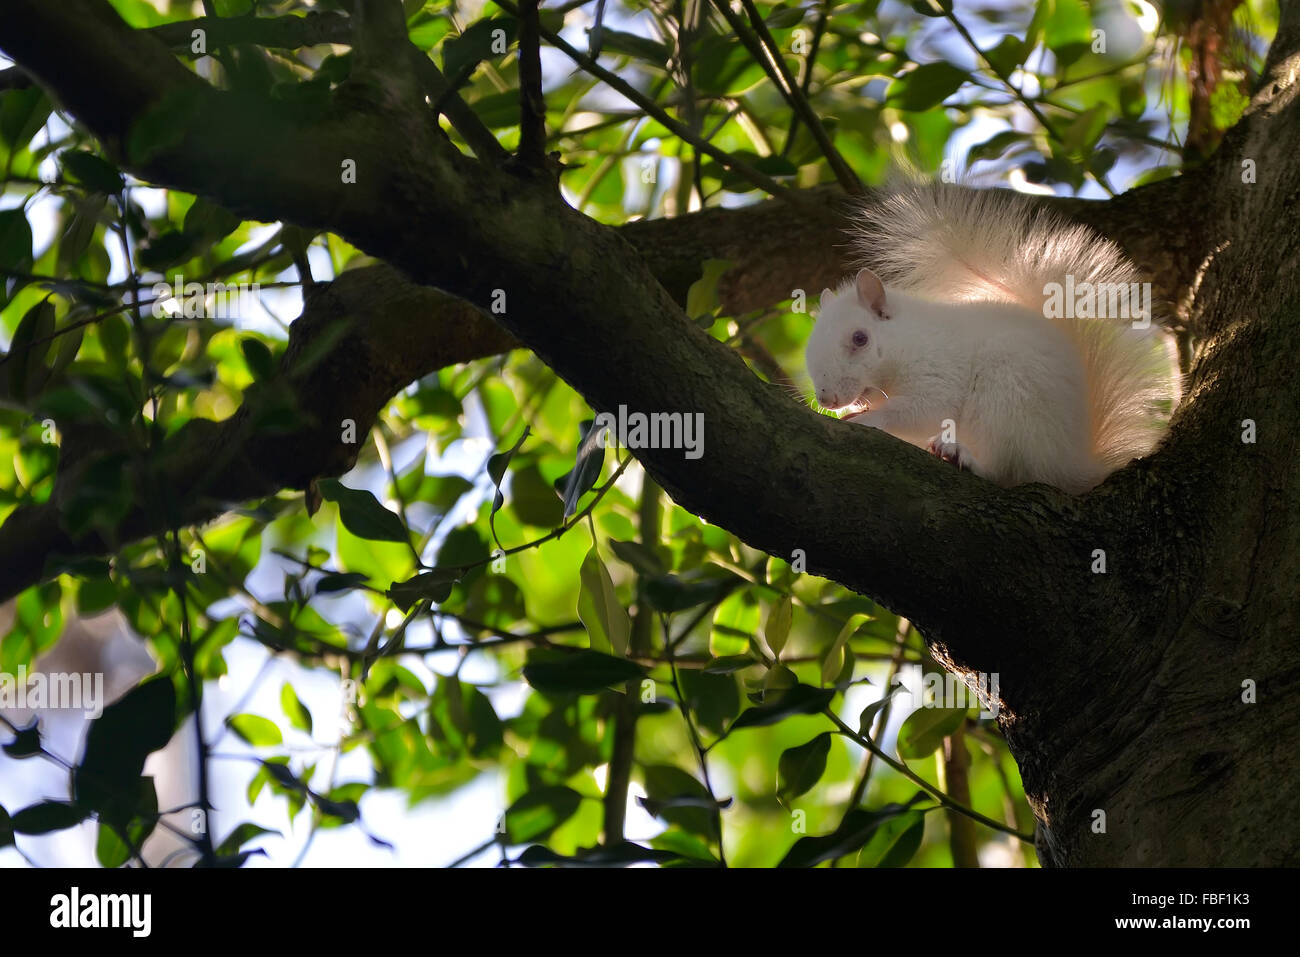 Hastings, England. 15th January 2016.  A rare albino squirrel spotted in Alexandra Park, Hastings, East Sussex, England. UK. Stock Photo